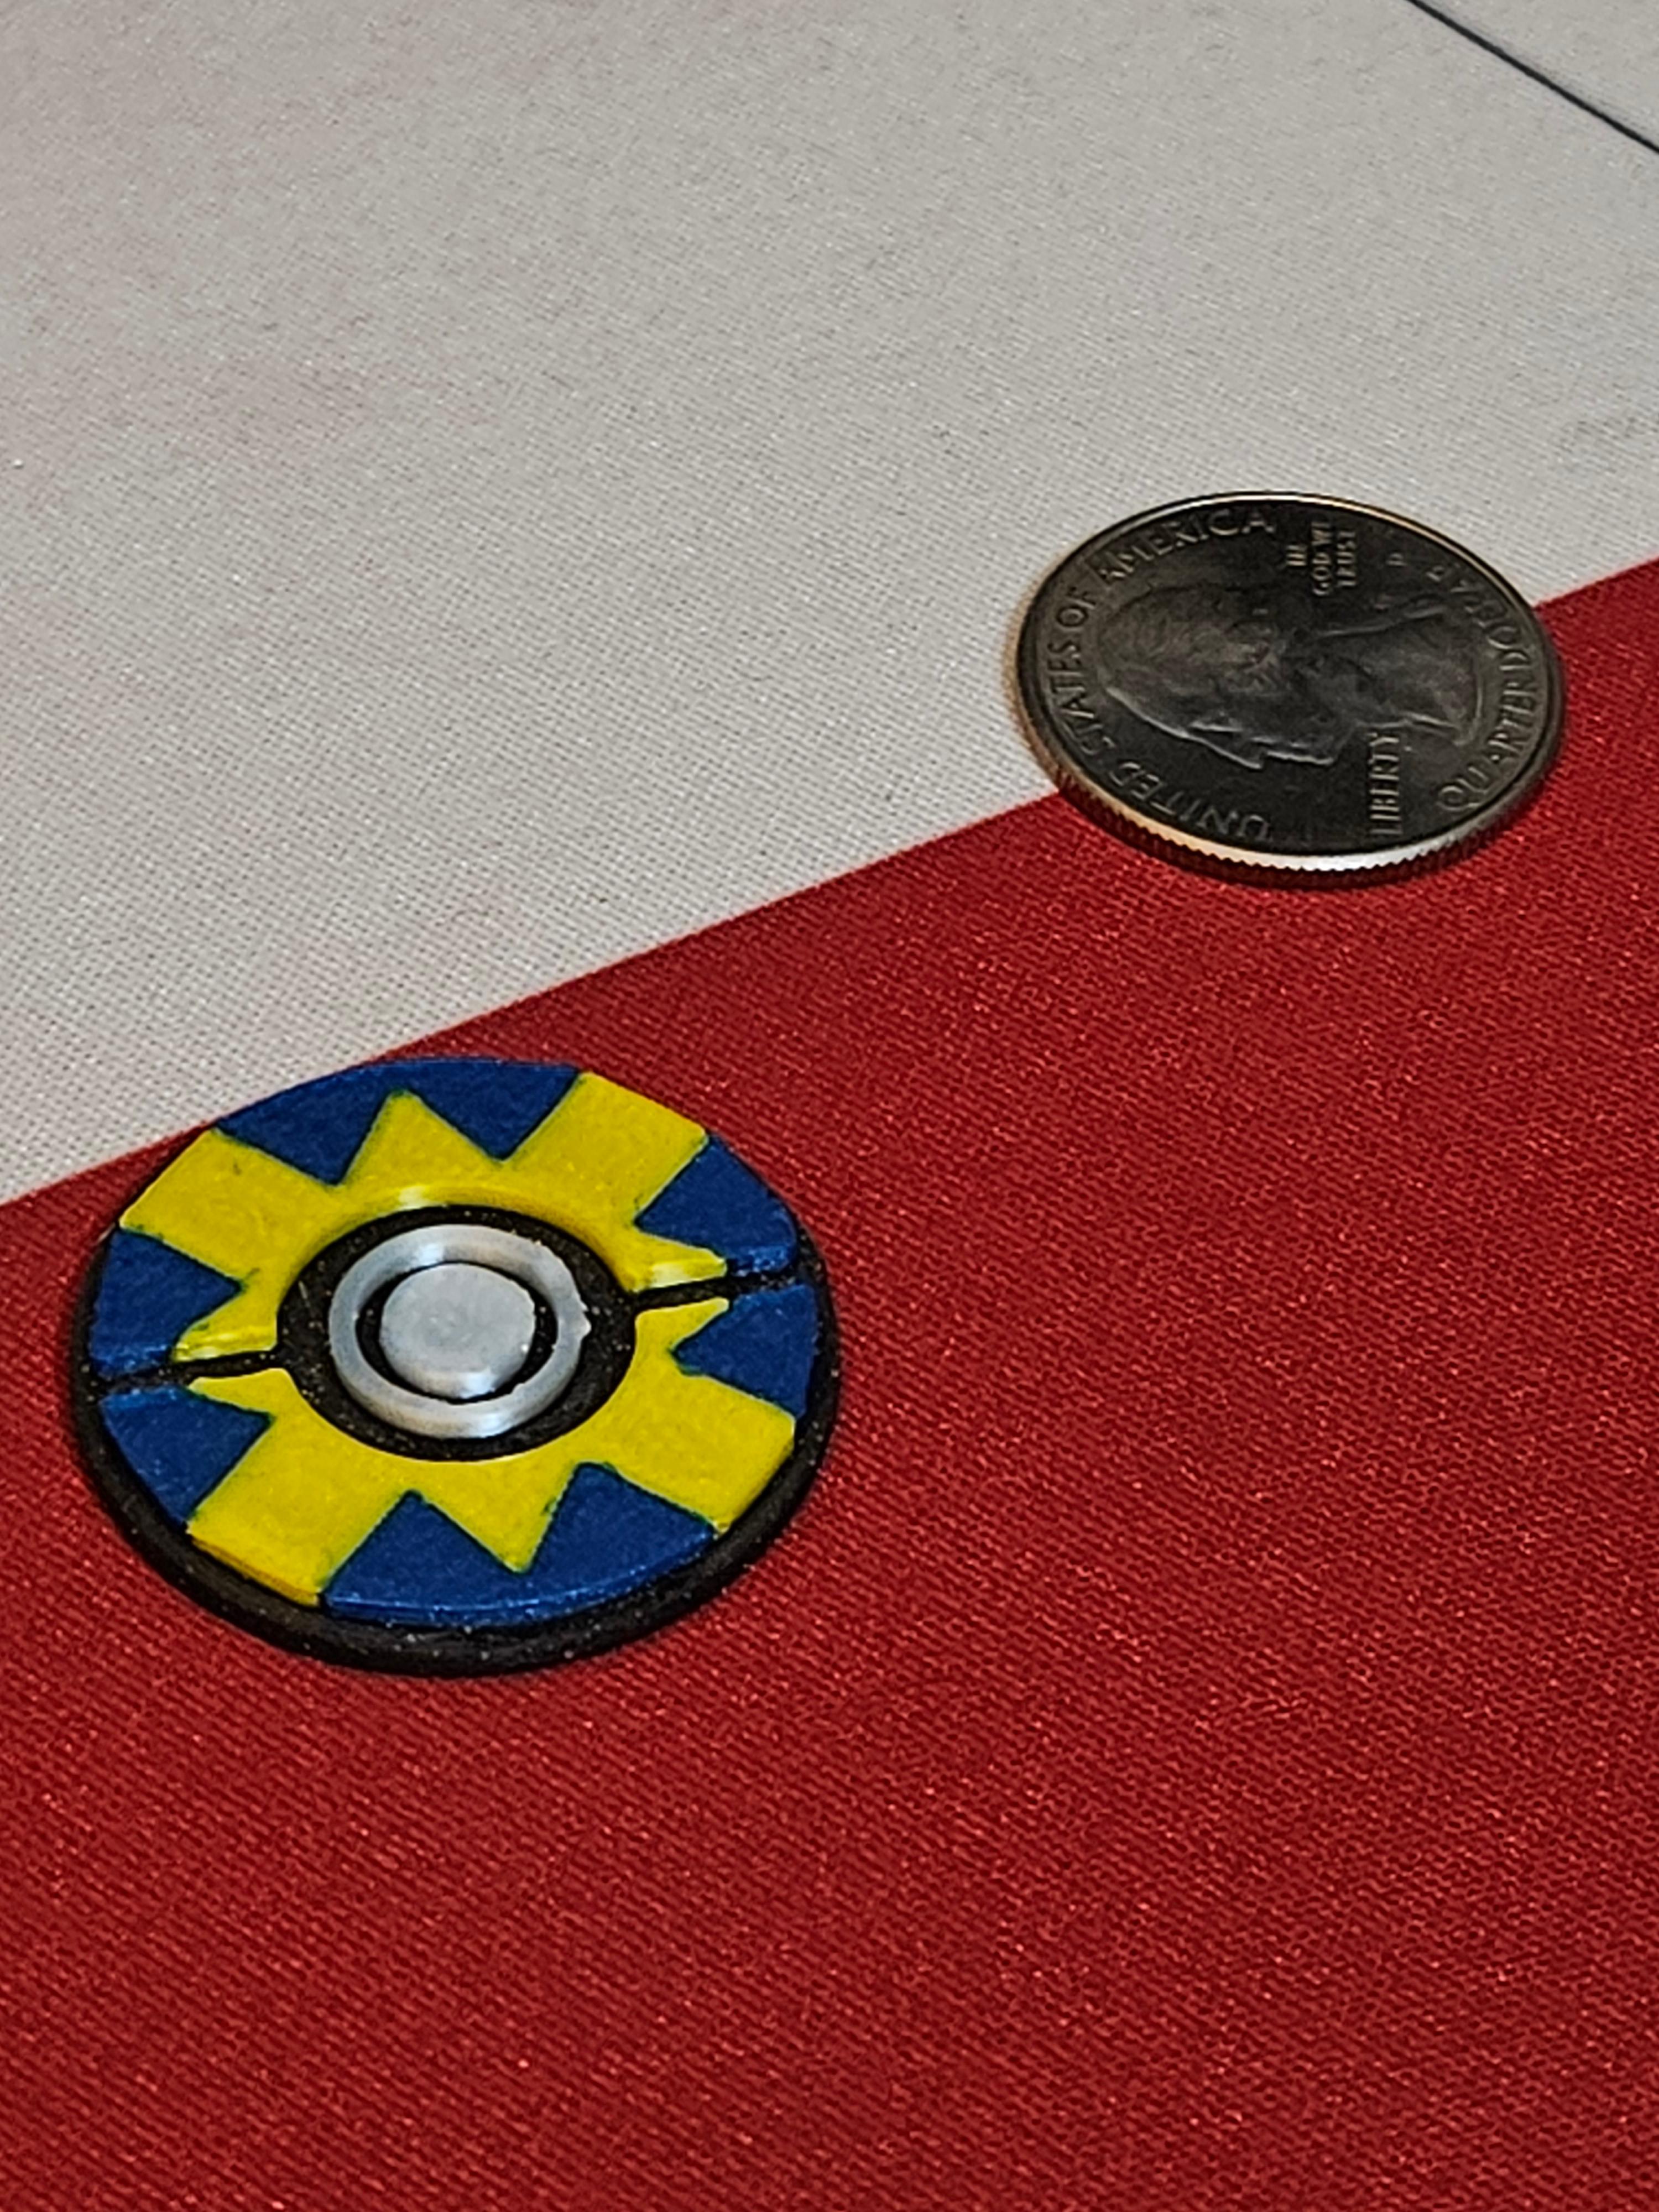 Quick Ball Token Double Sided Ver. 3d model